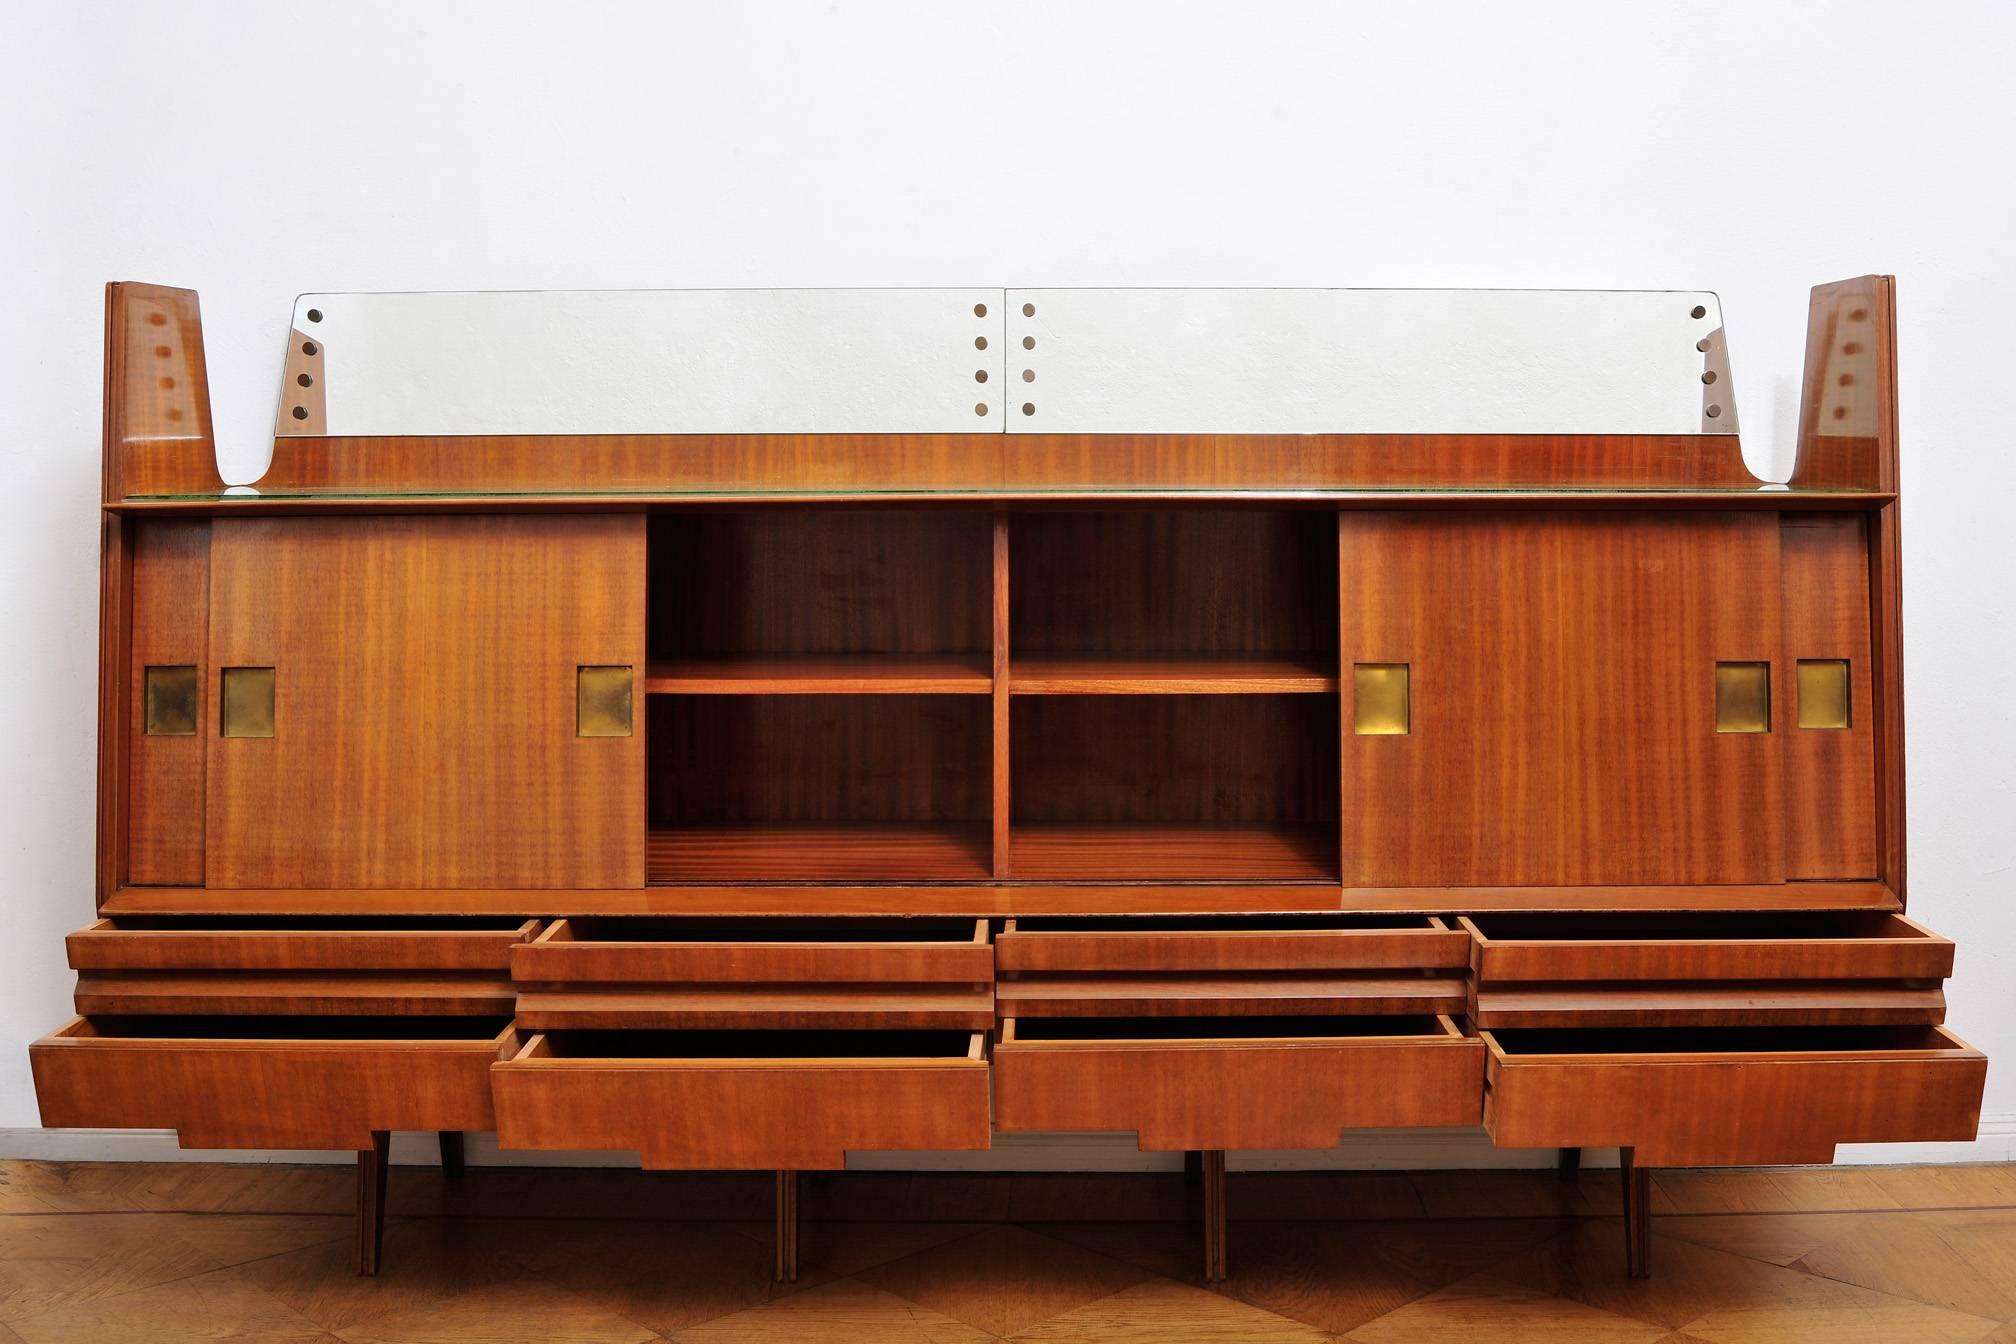 20th century Italian sideboard from the 1960s made of teak with brass handles, a glass top and mirror back border. The sideboard has eight drawers and four sliding doors behind each of which is a removable shelf.